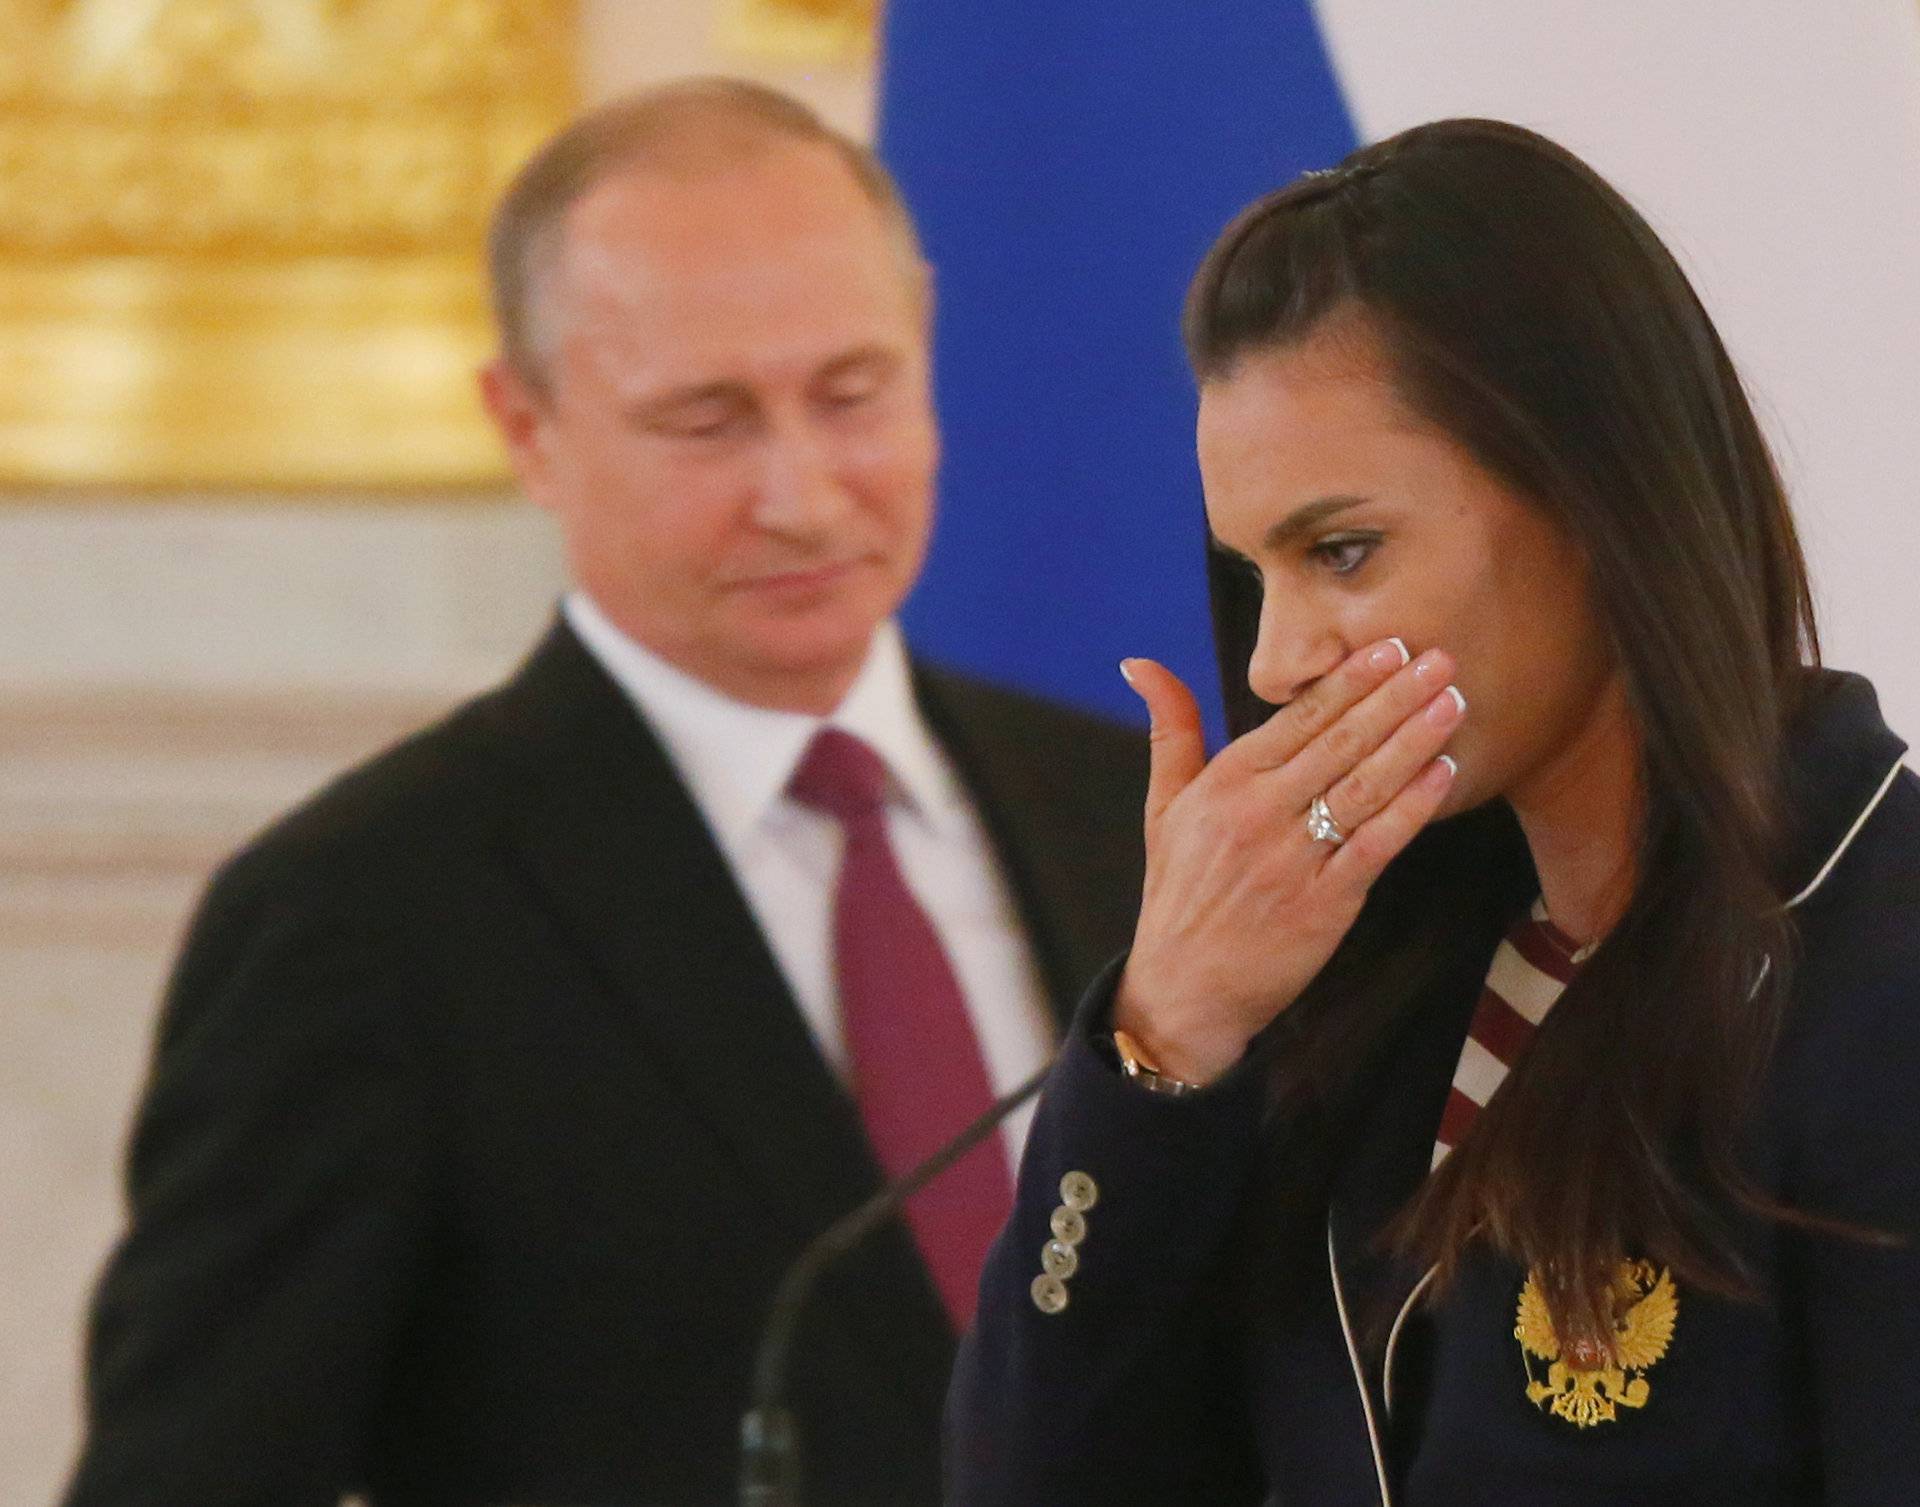 Track-and-field athlete Isinbayeva reacts as she walks past Russian President Putin during his personal send-off for members of the Russian Olympic team at the Kremlin in Moscow